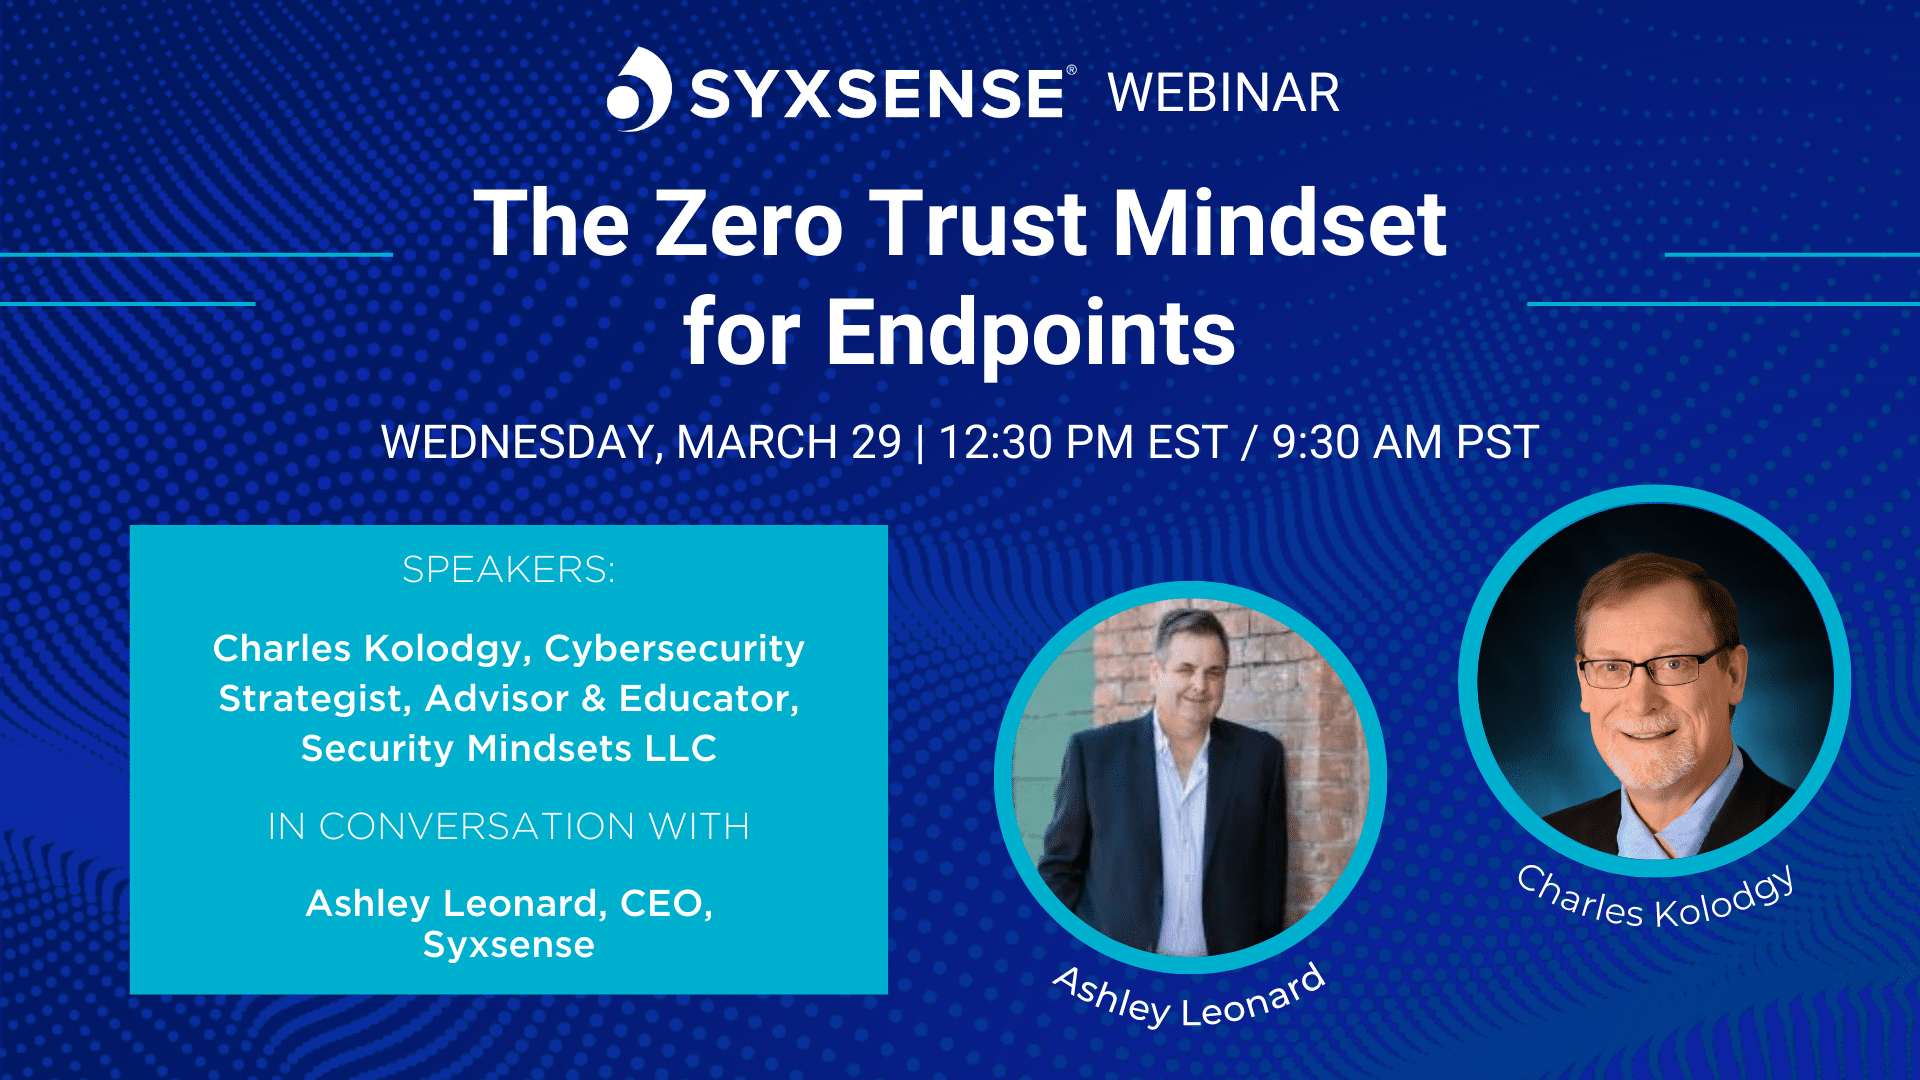 The Zero Trust Mindset for Endpoints